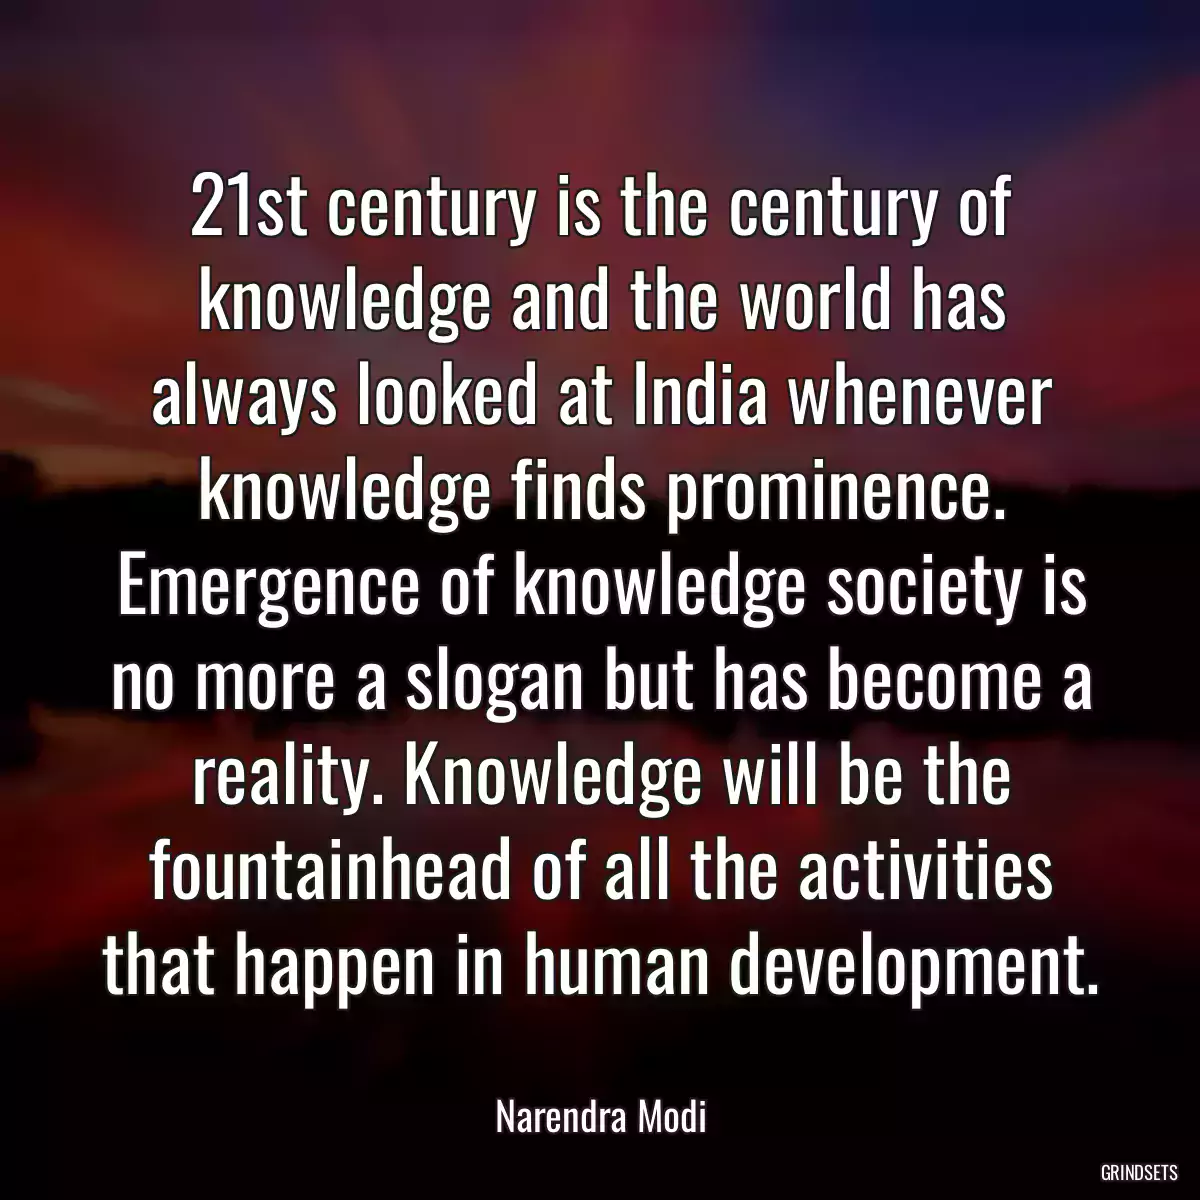 21st century is the century of knowledge and the world has always looked at India whenever knowledge finds prominence. Emergence of knowledge society is no more a slogan but has become a reality. Knowledge will be the fountainhead of all the activities that happen in human development.